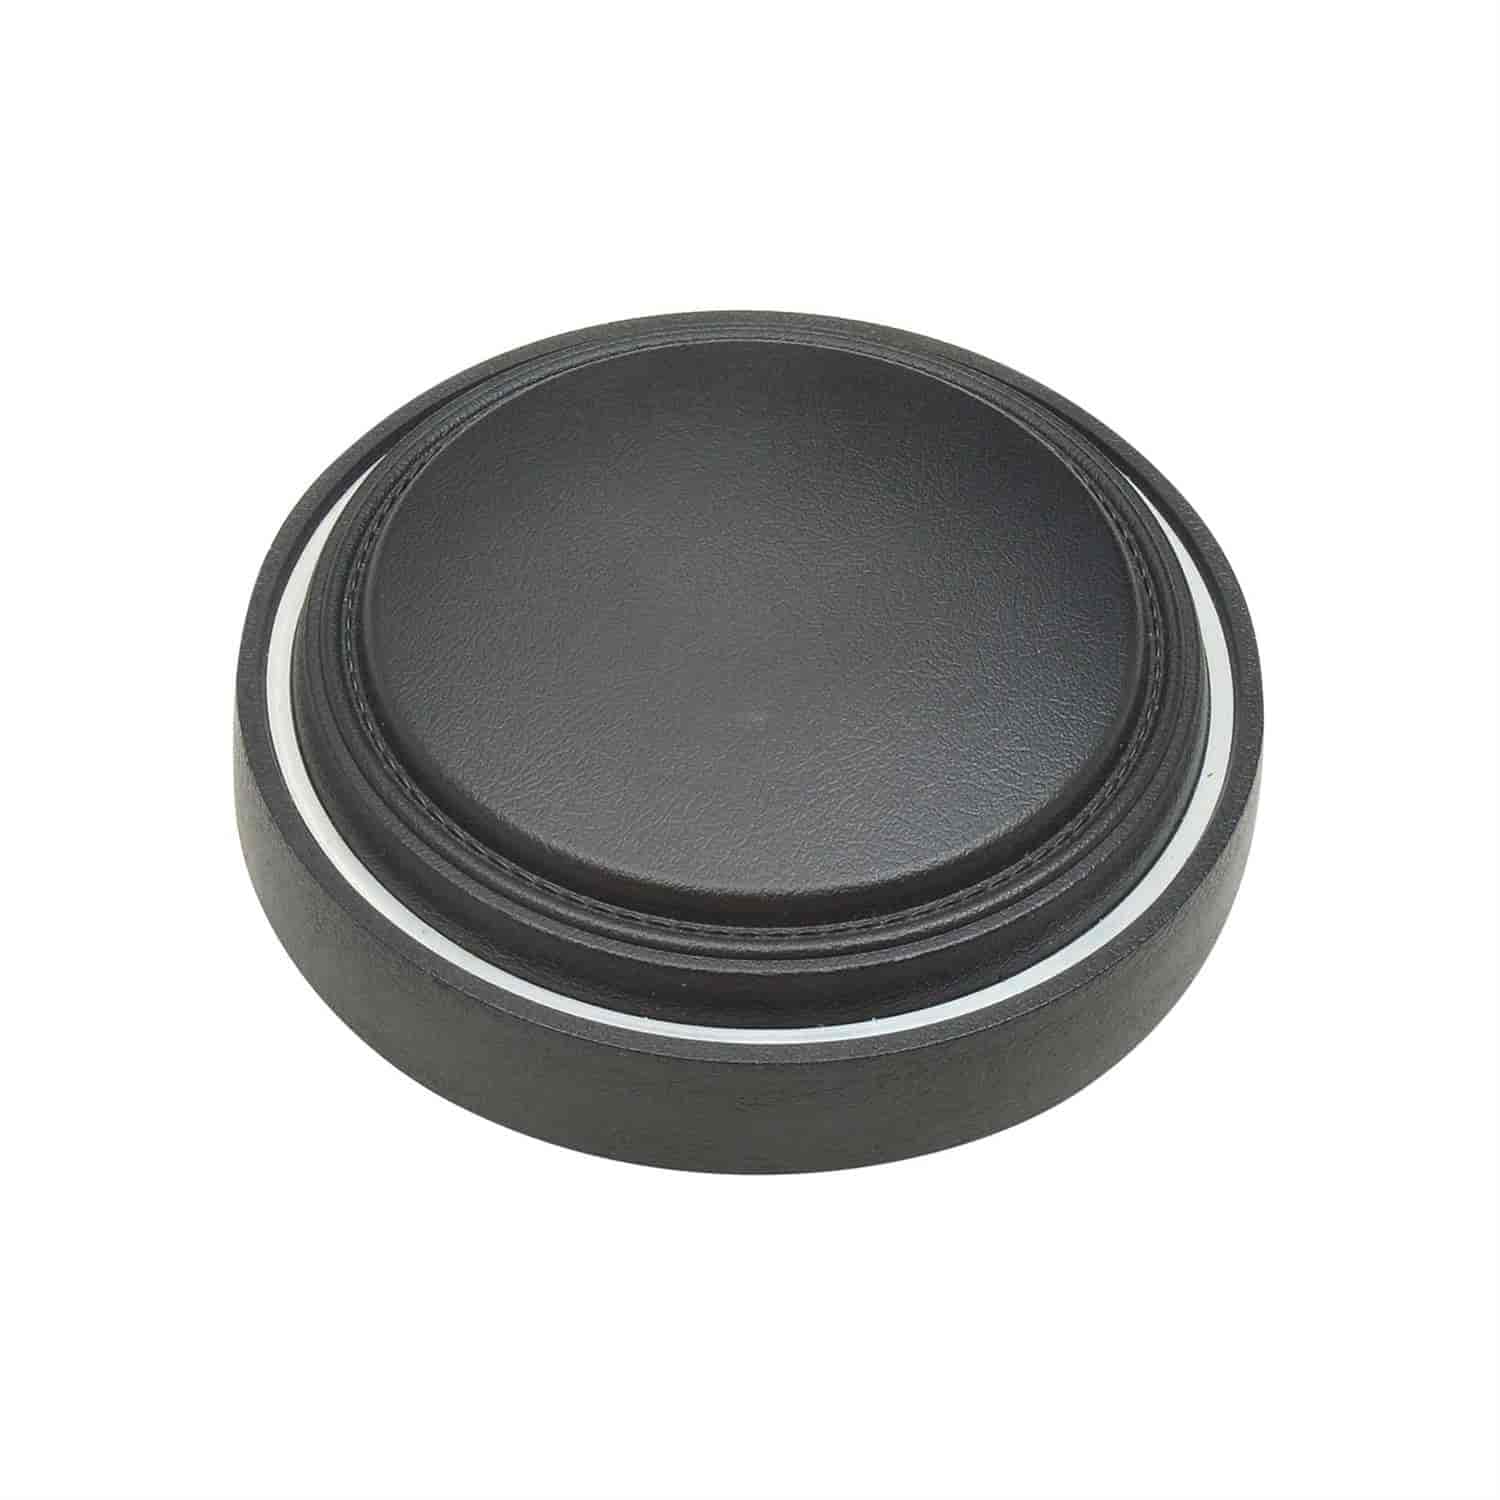 Tuff wheel Horn Button direct fit (OE-replacement) Black